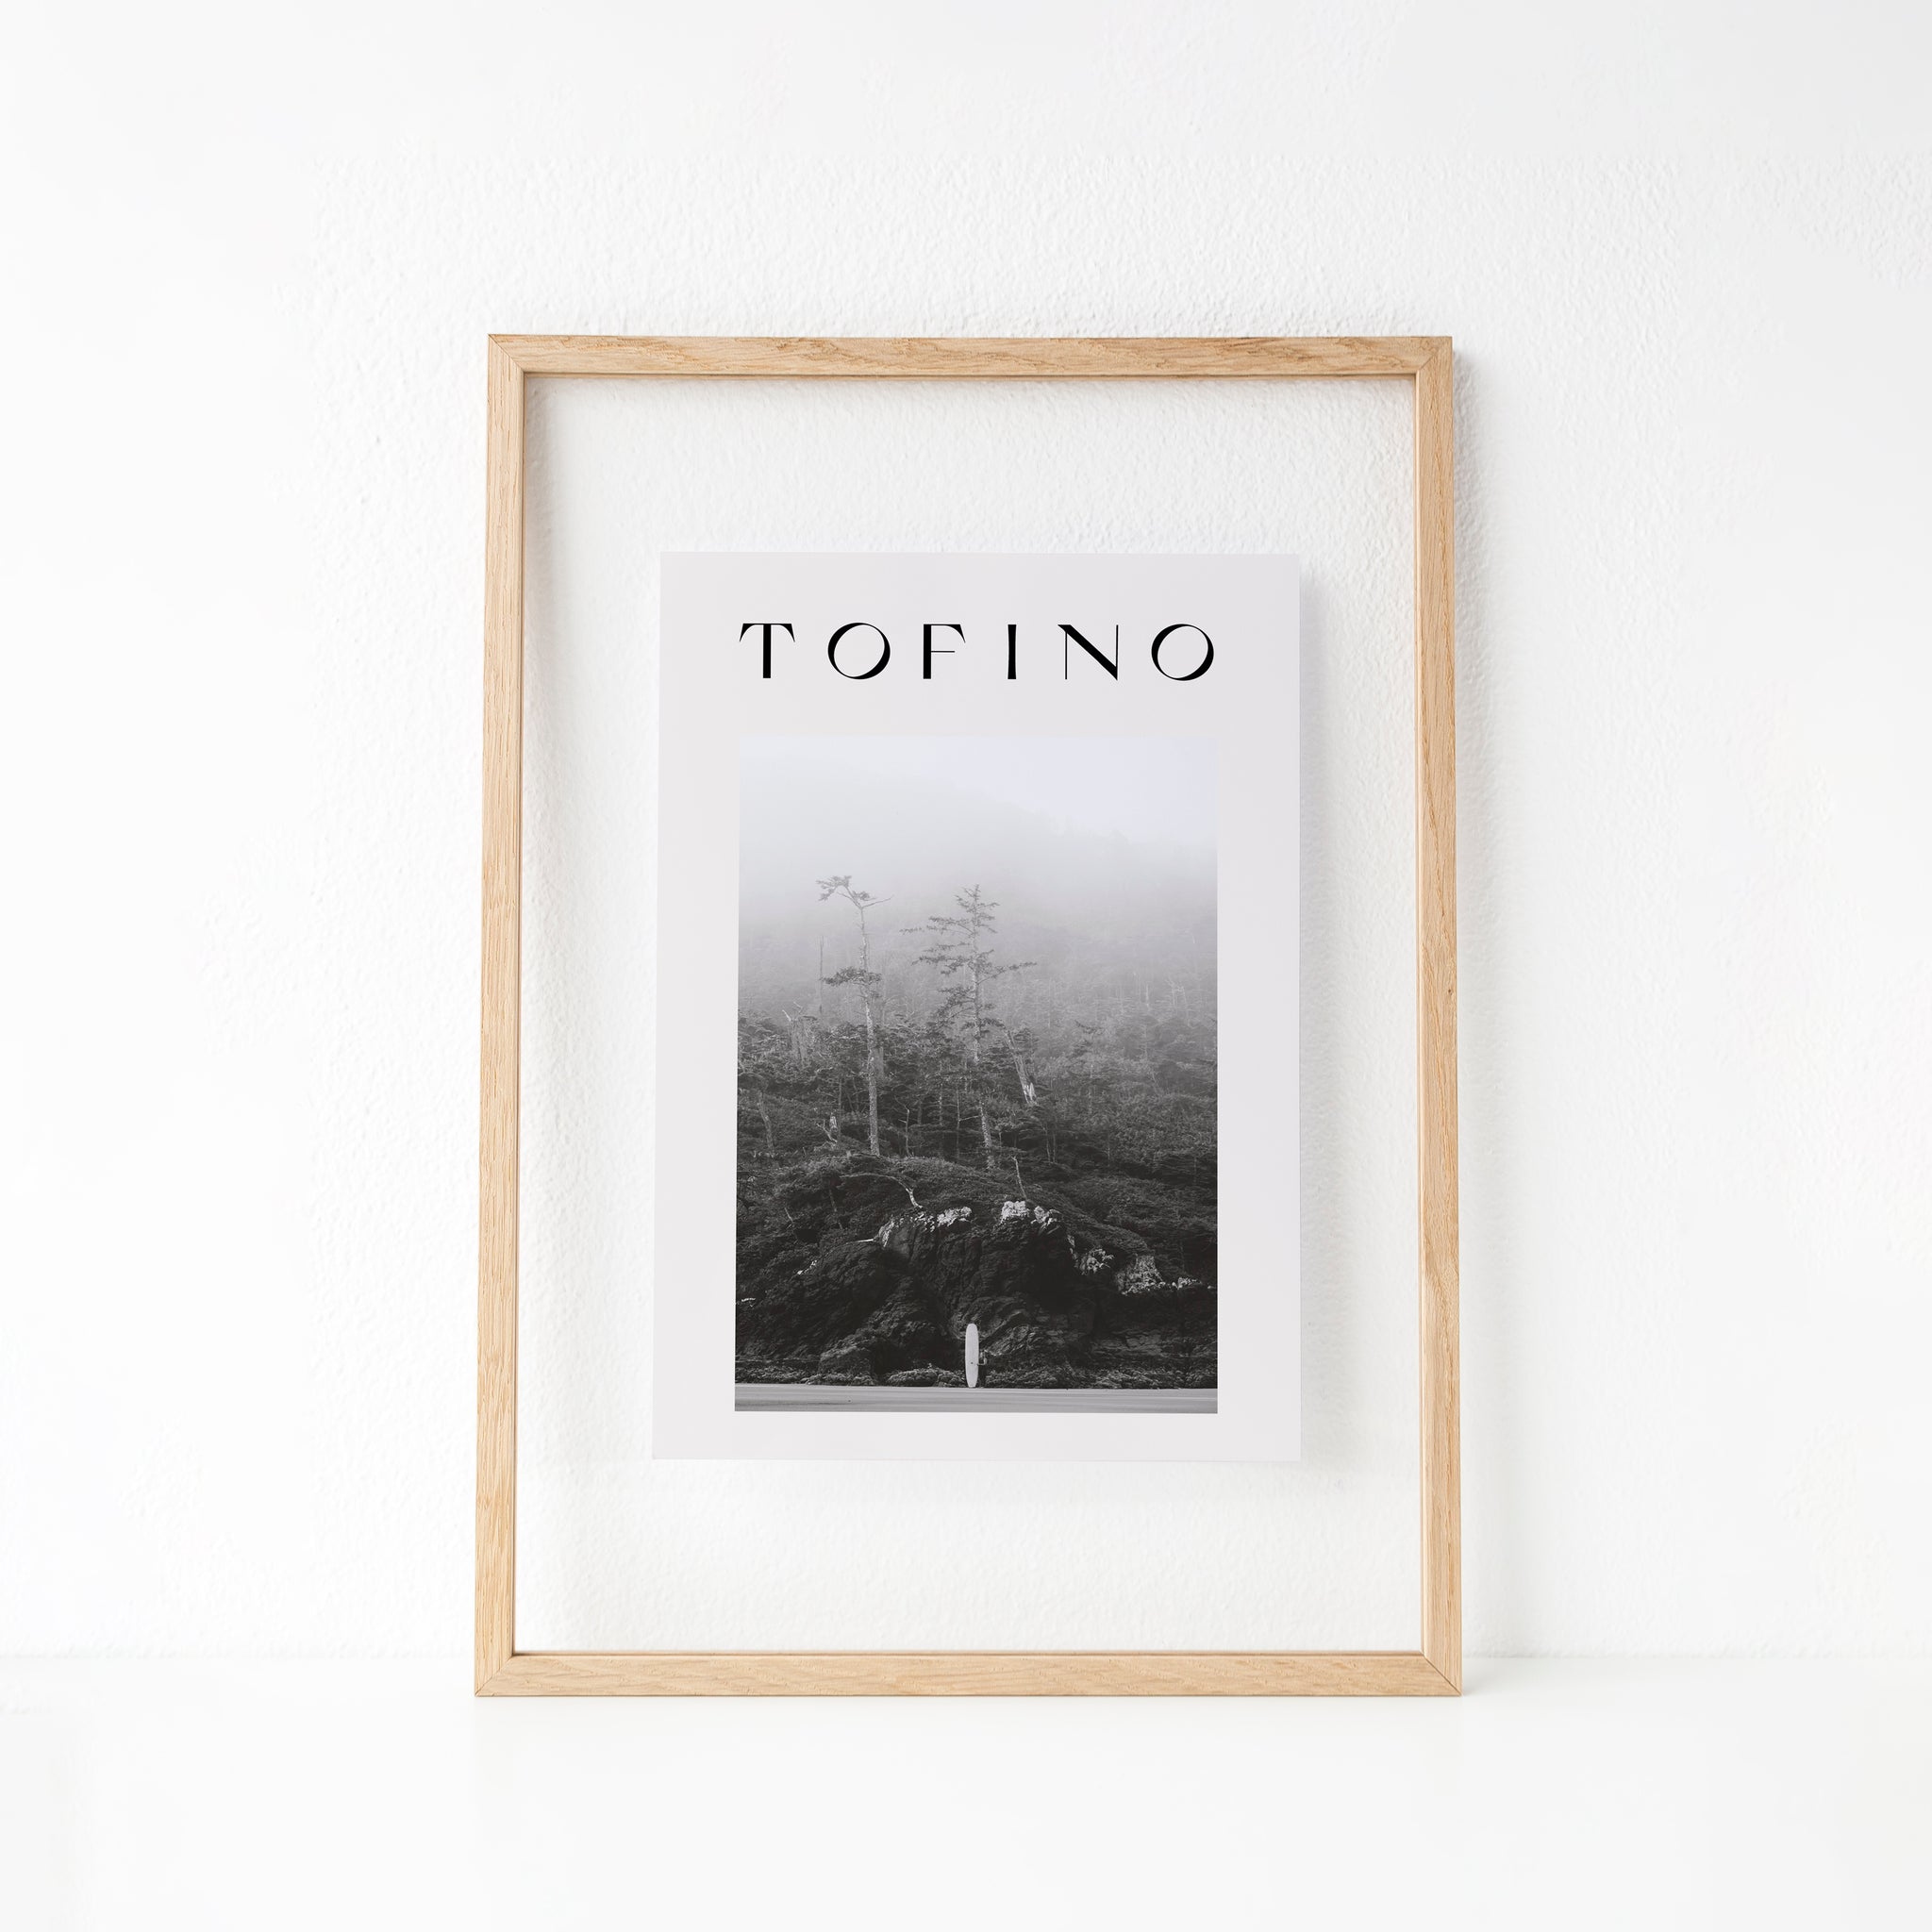 Tofino Poster by Cristina Gareau. pacific northwest photography | poster club